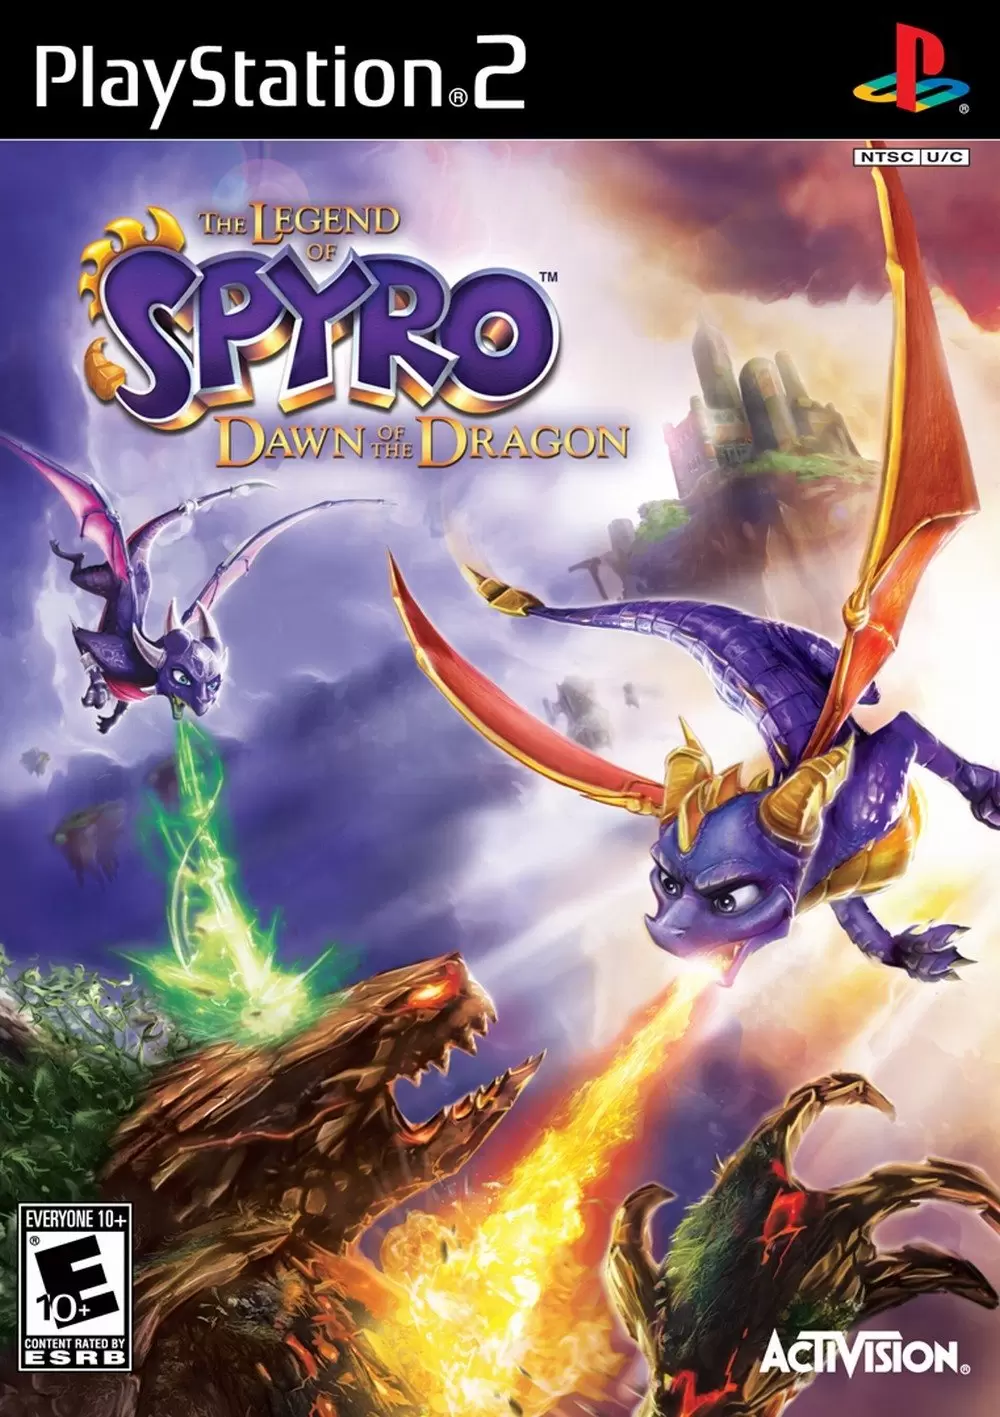 PS2 Games - The Legend of Spyro: Dawn of the Dragon